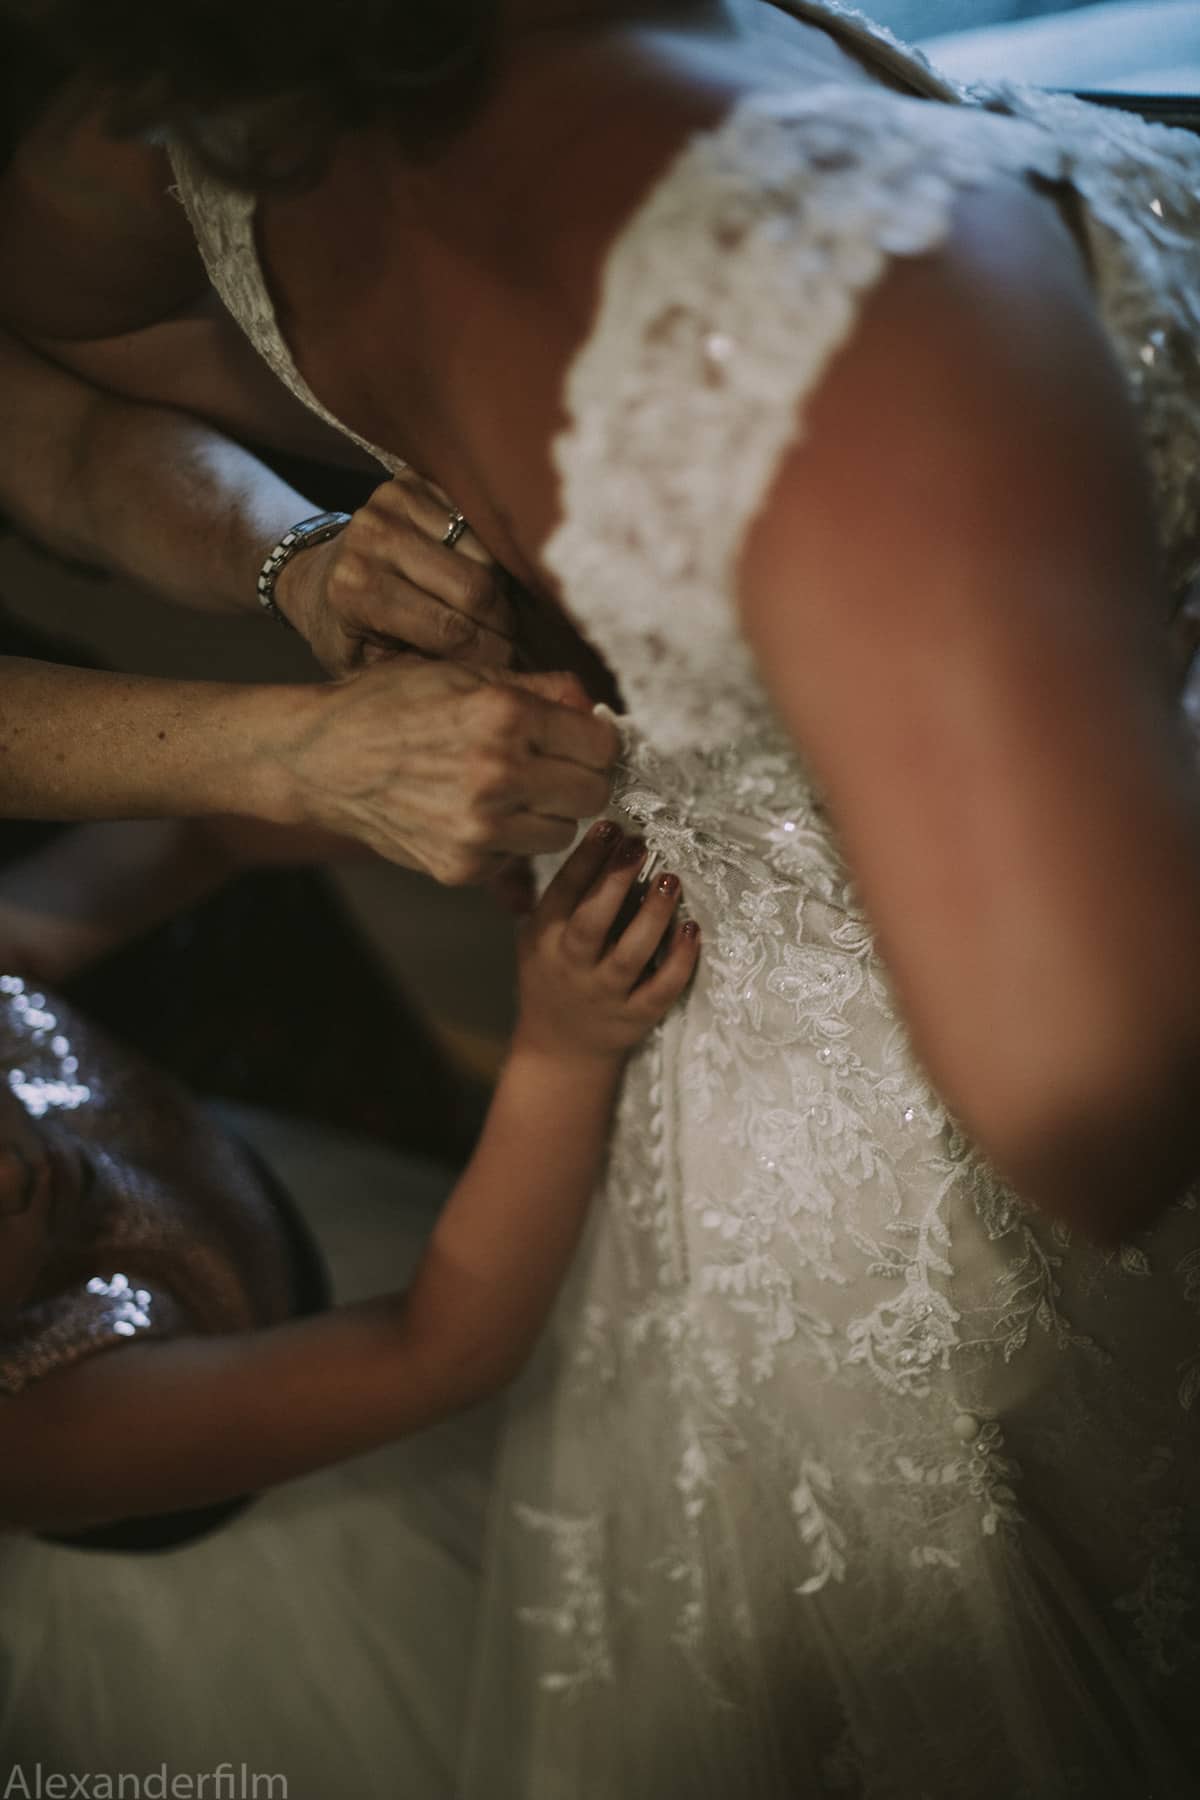 a wedding dress being buttoned from behind